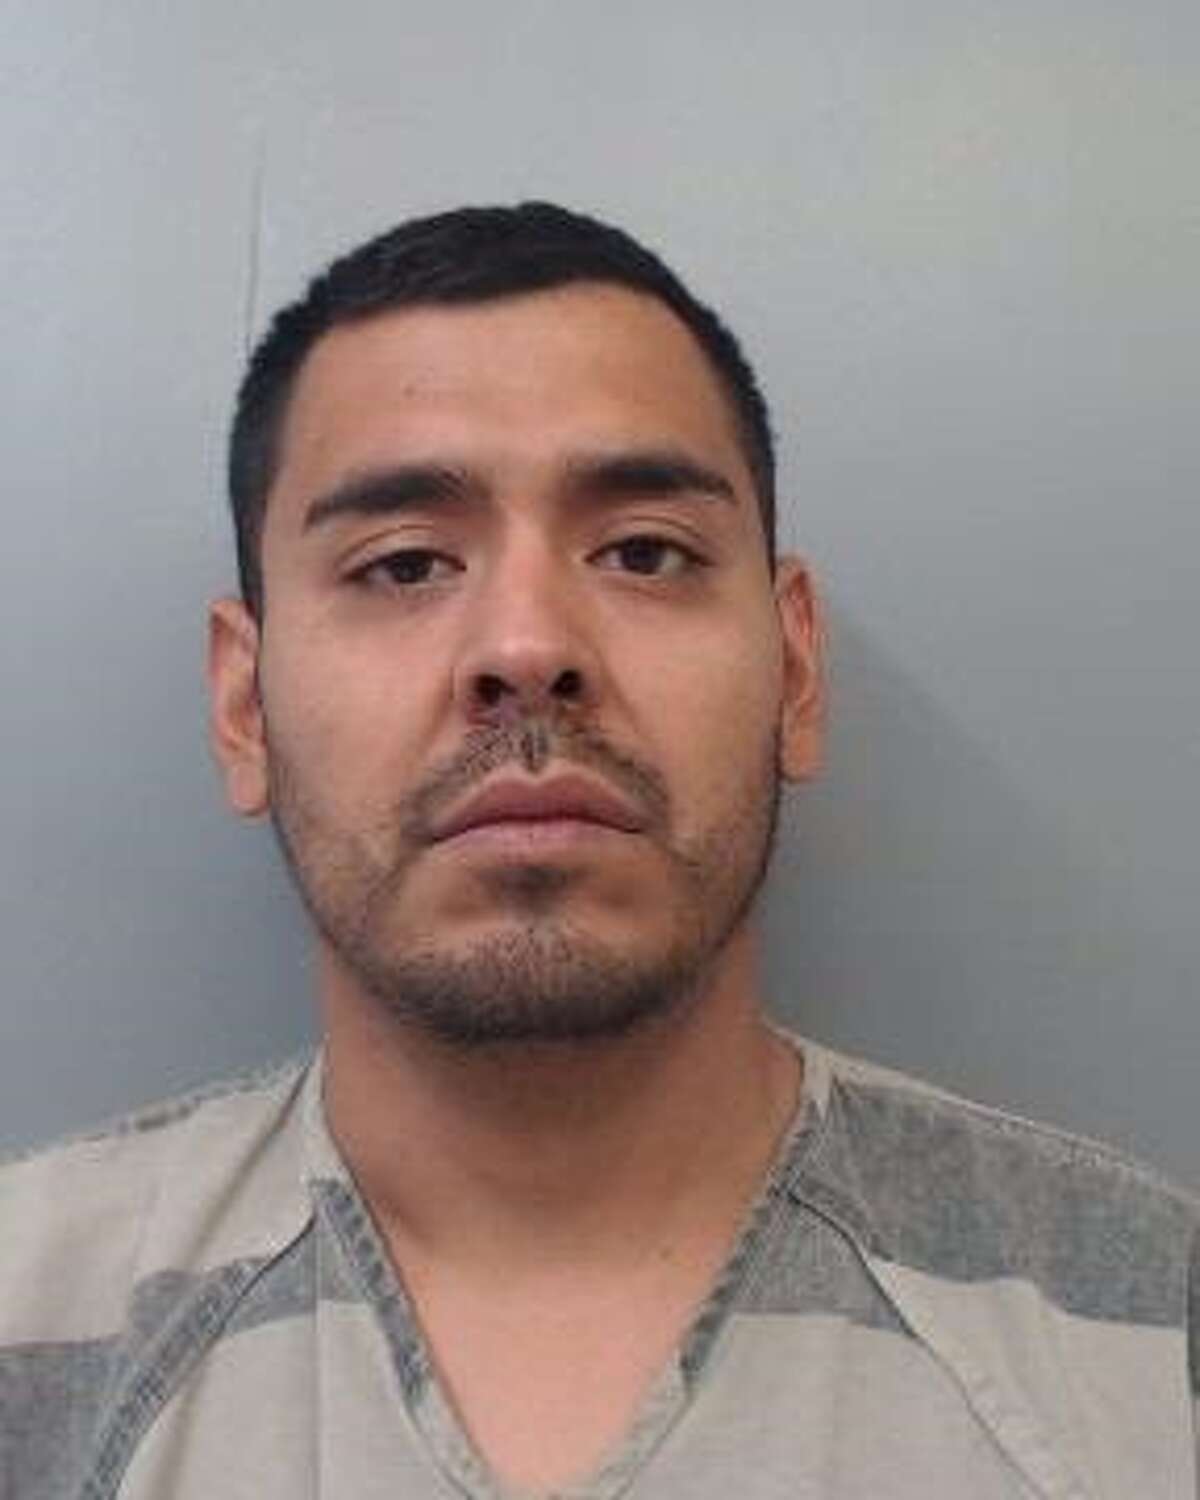 Martin Salvador Licea Rosales, 25, was charged with assault, family violence.